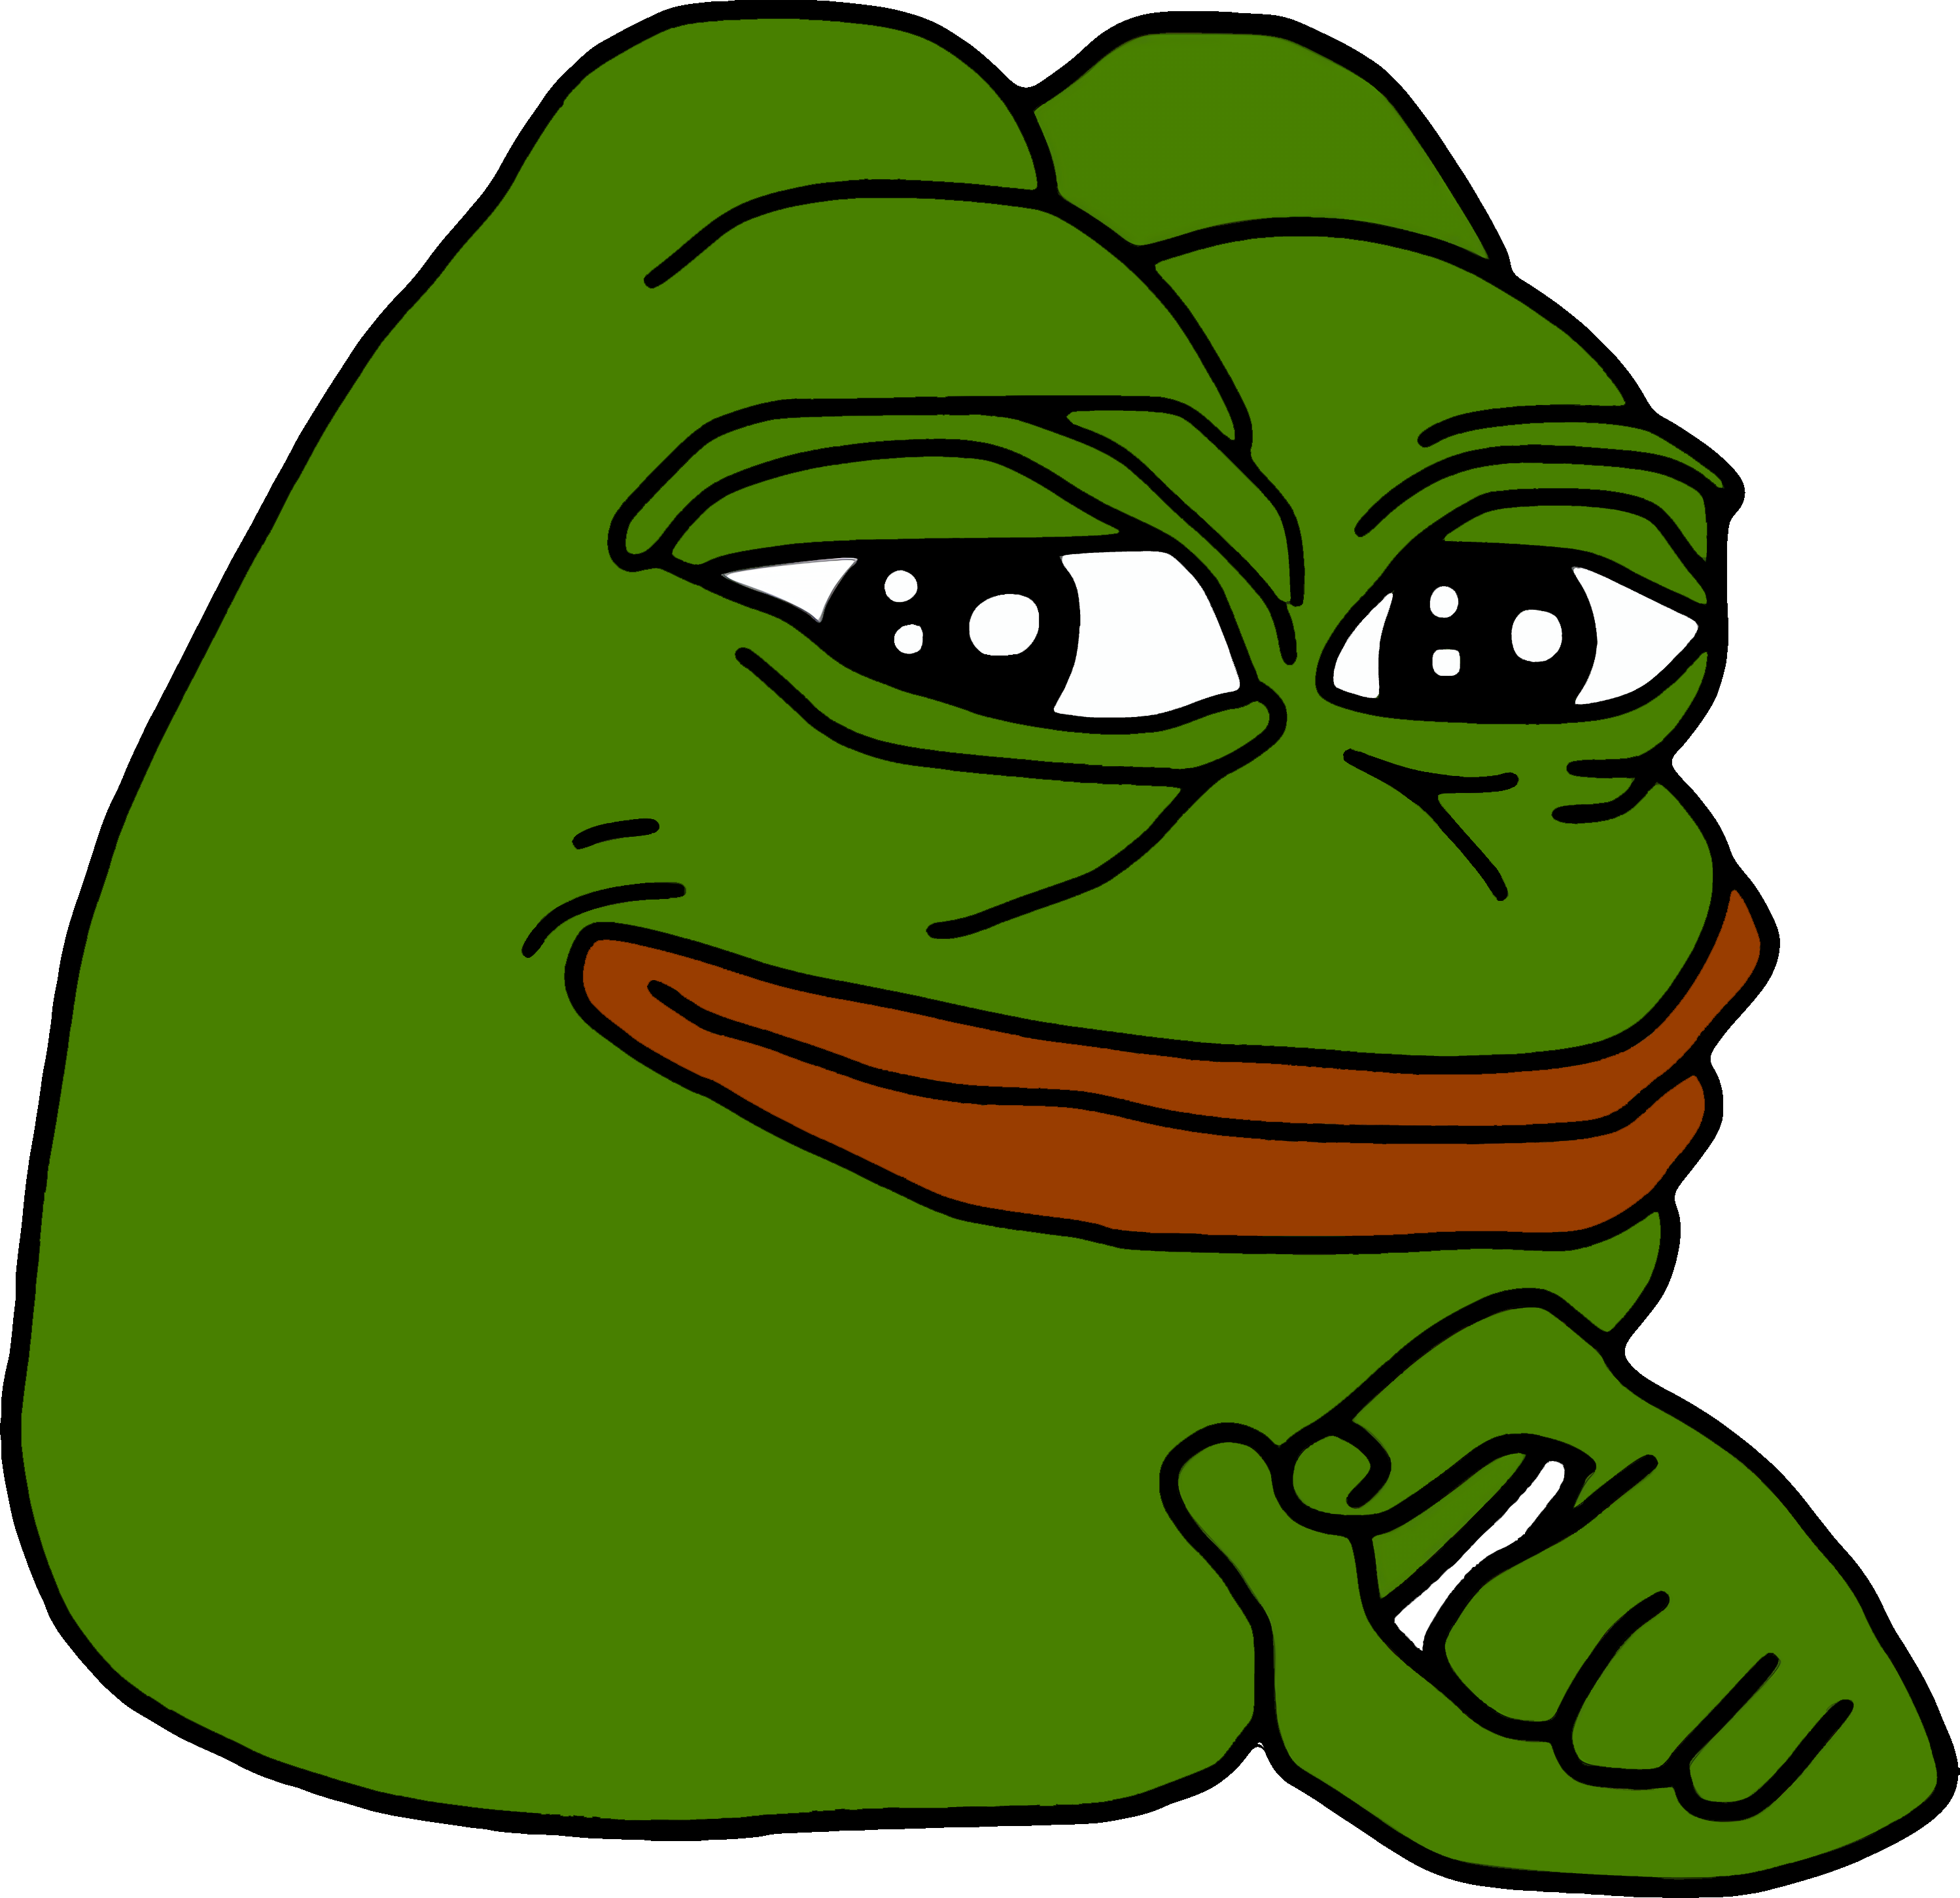 Pepe The Frog Meme Clip Art - Pepe The Frog Png.